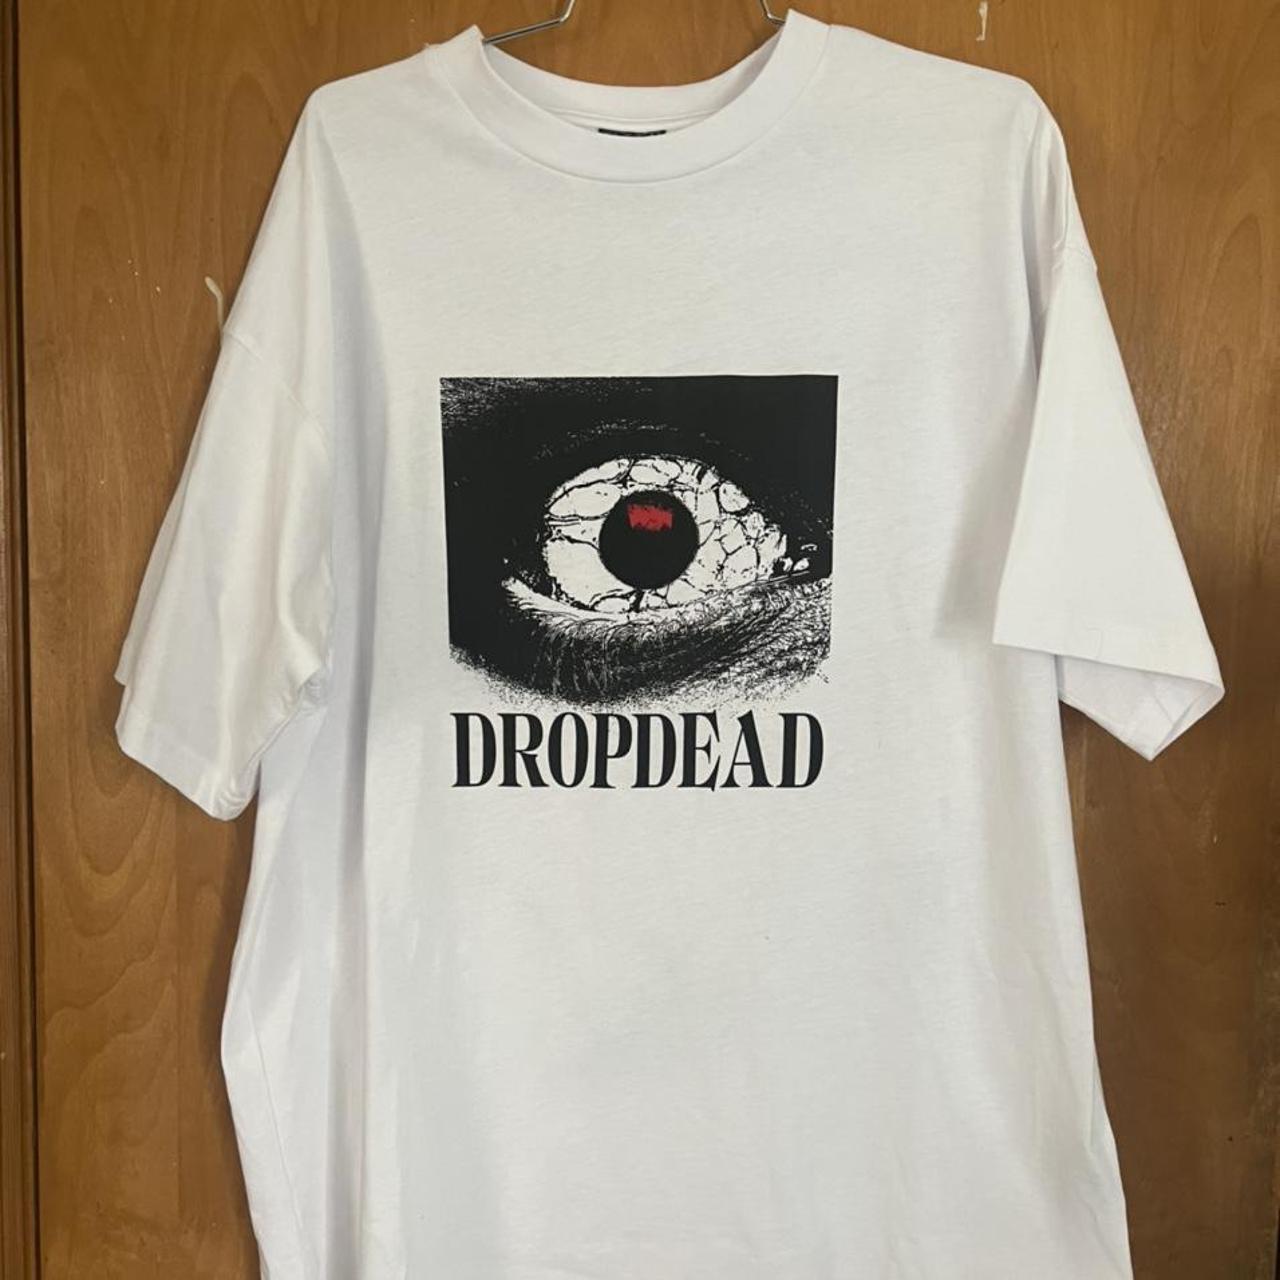 Dropdead Men's White and Red T-shirt